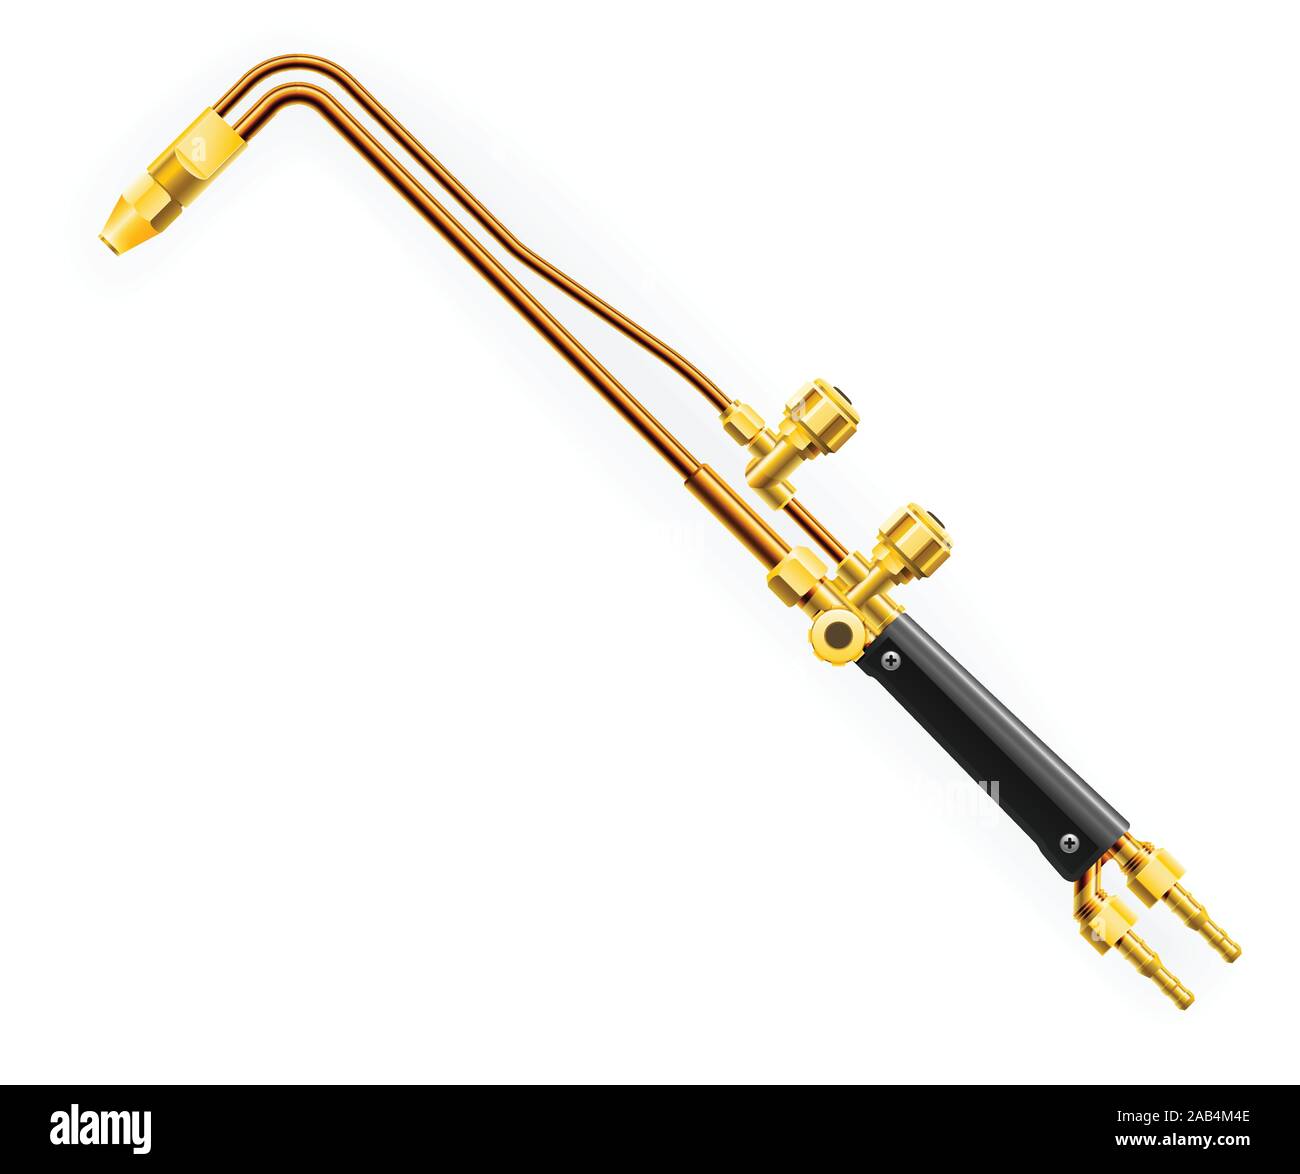 Oxy acetylene cutting torch - gas burner gun for cutting and welding metals Stock Vector